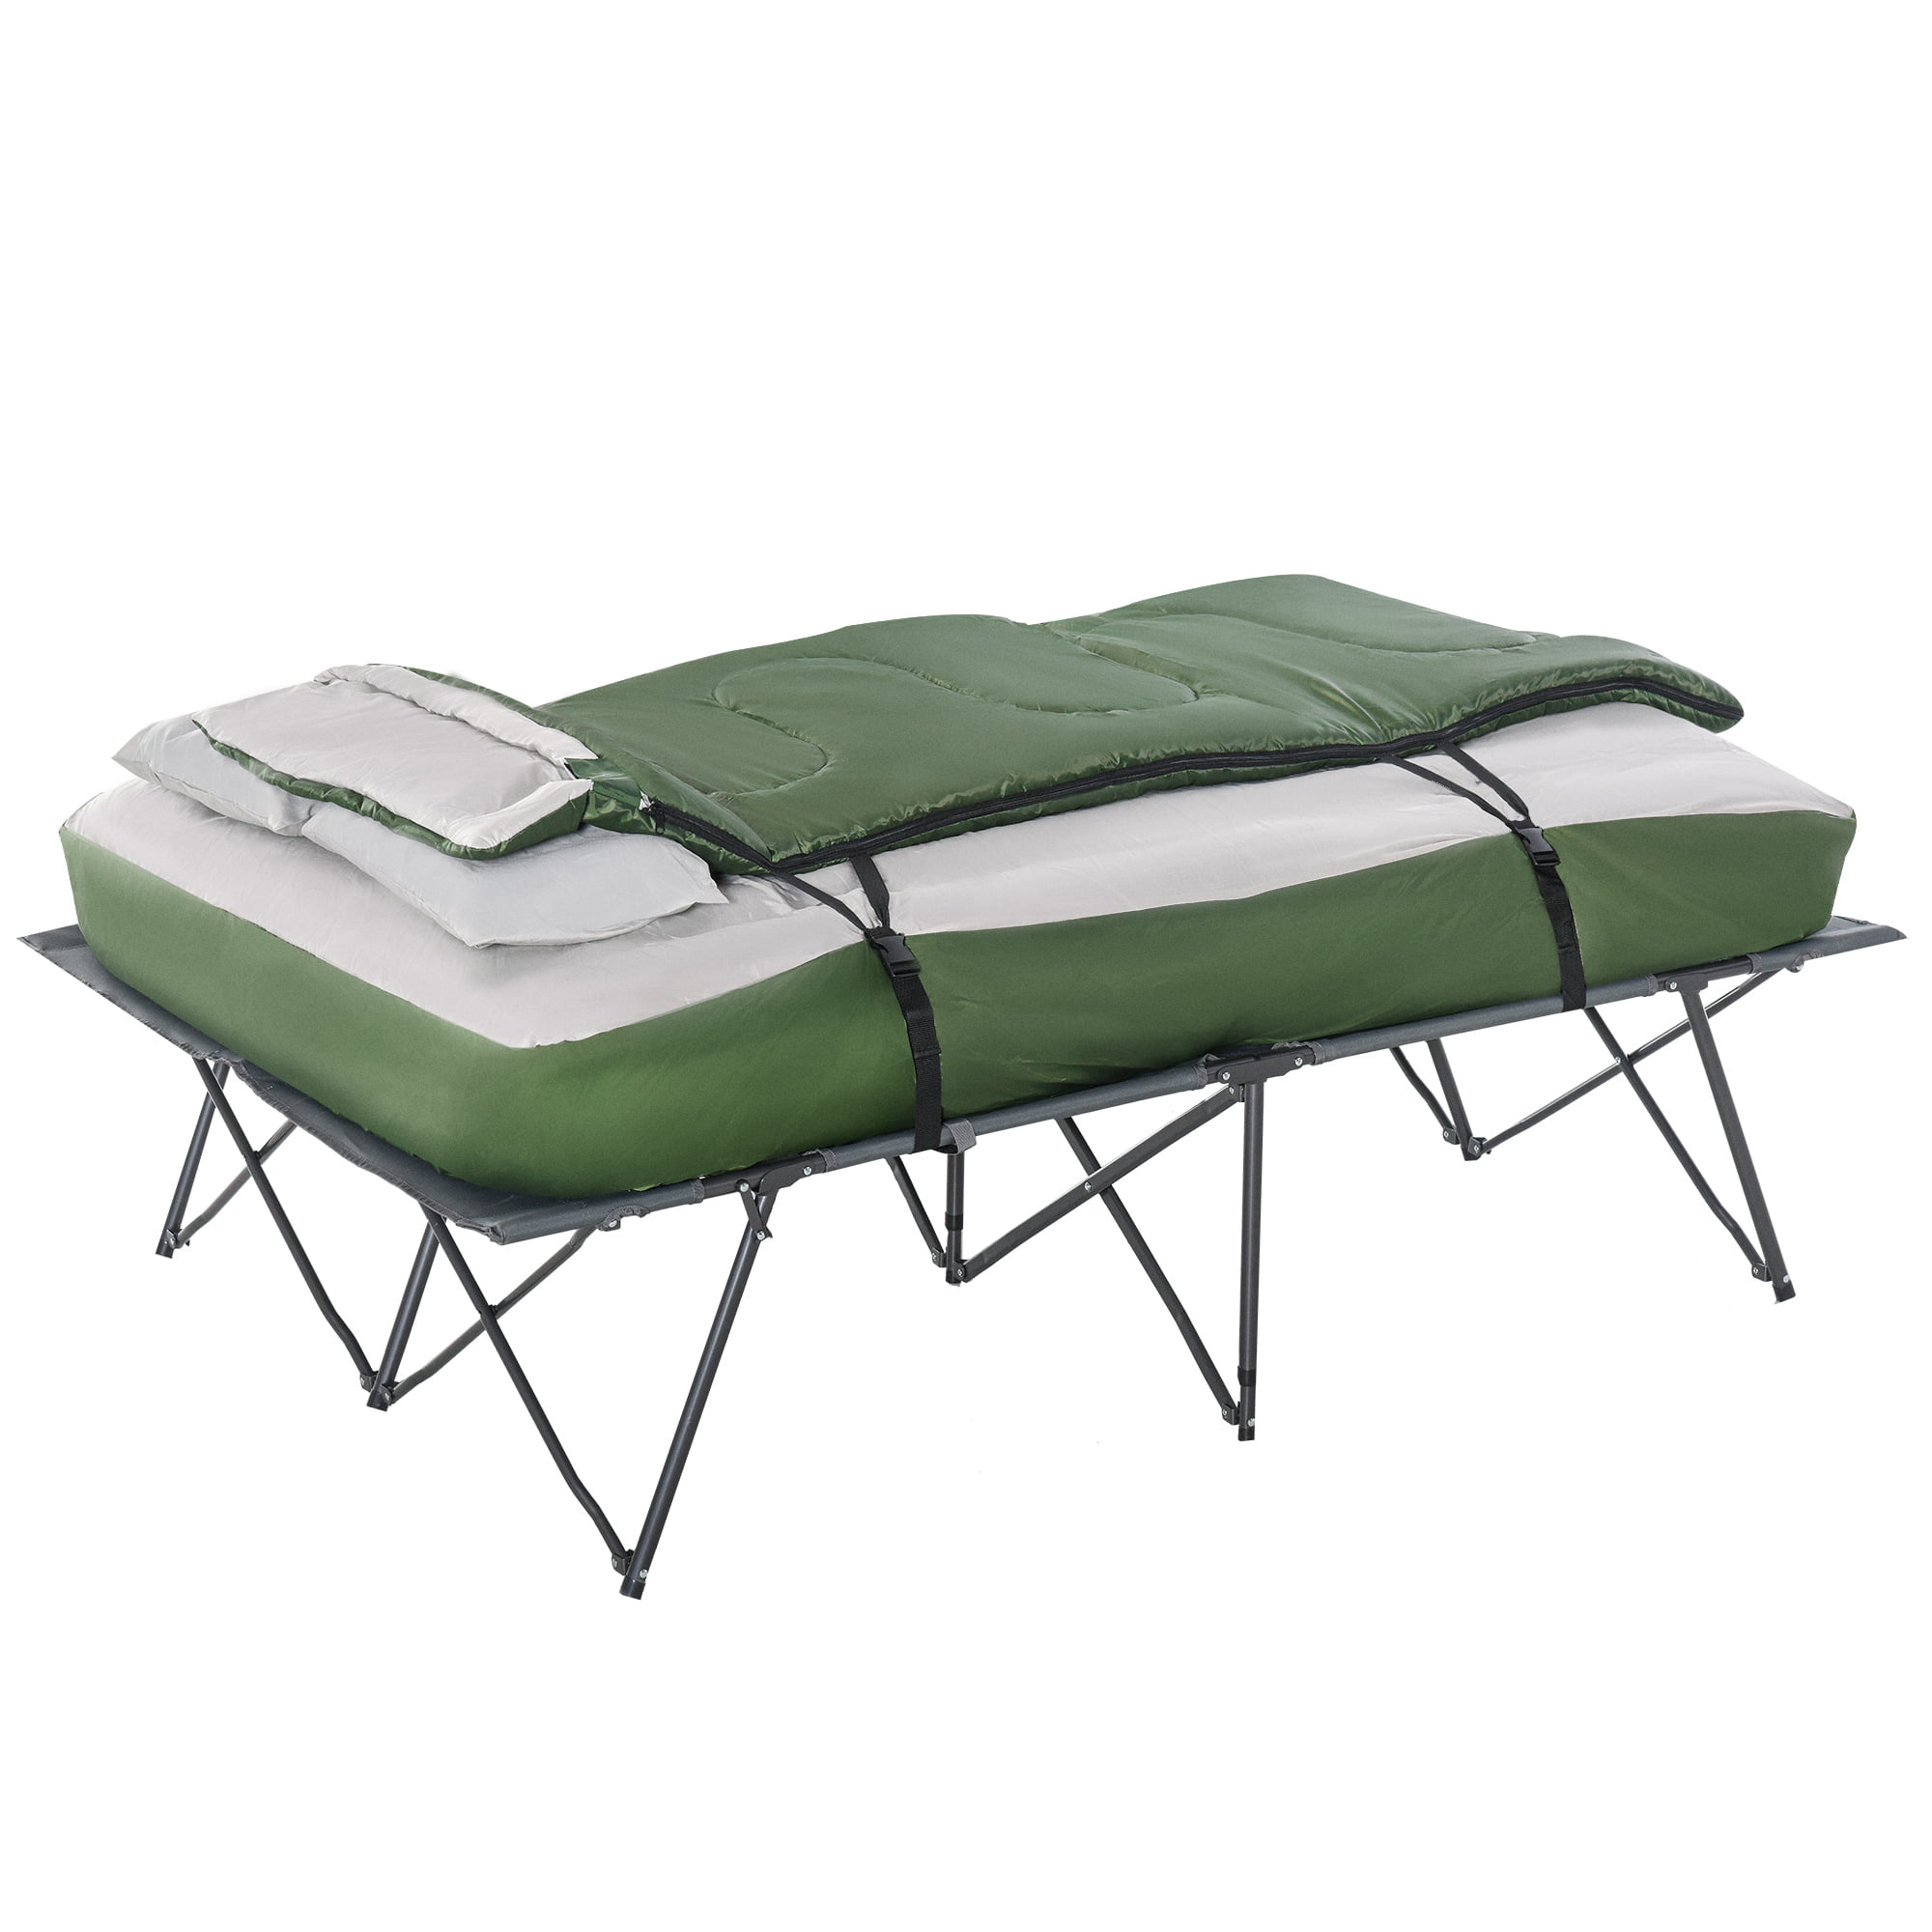 Outsunny 2Person Collapsible Portable Camping Cot Bed Set with